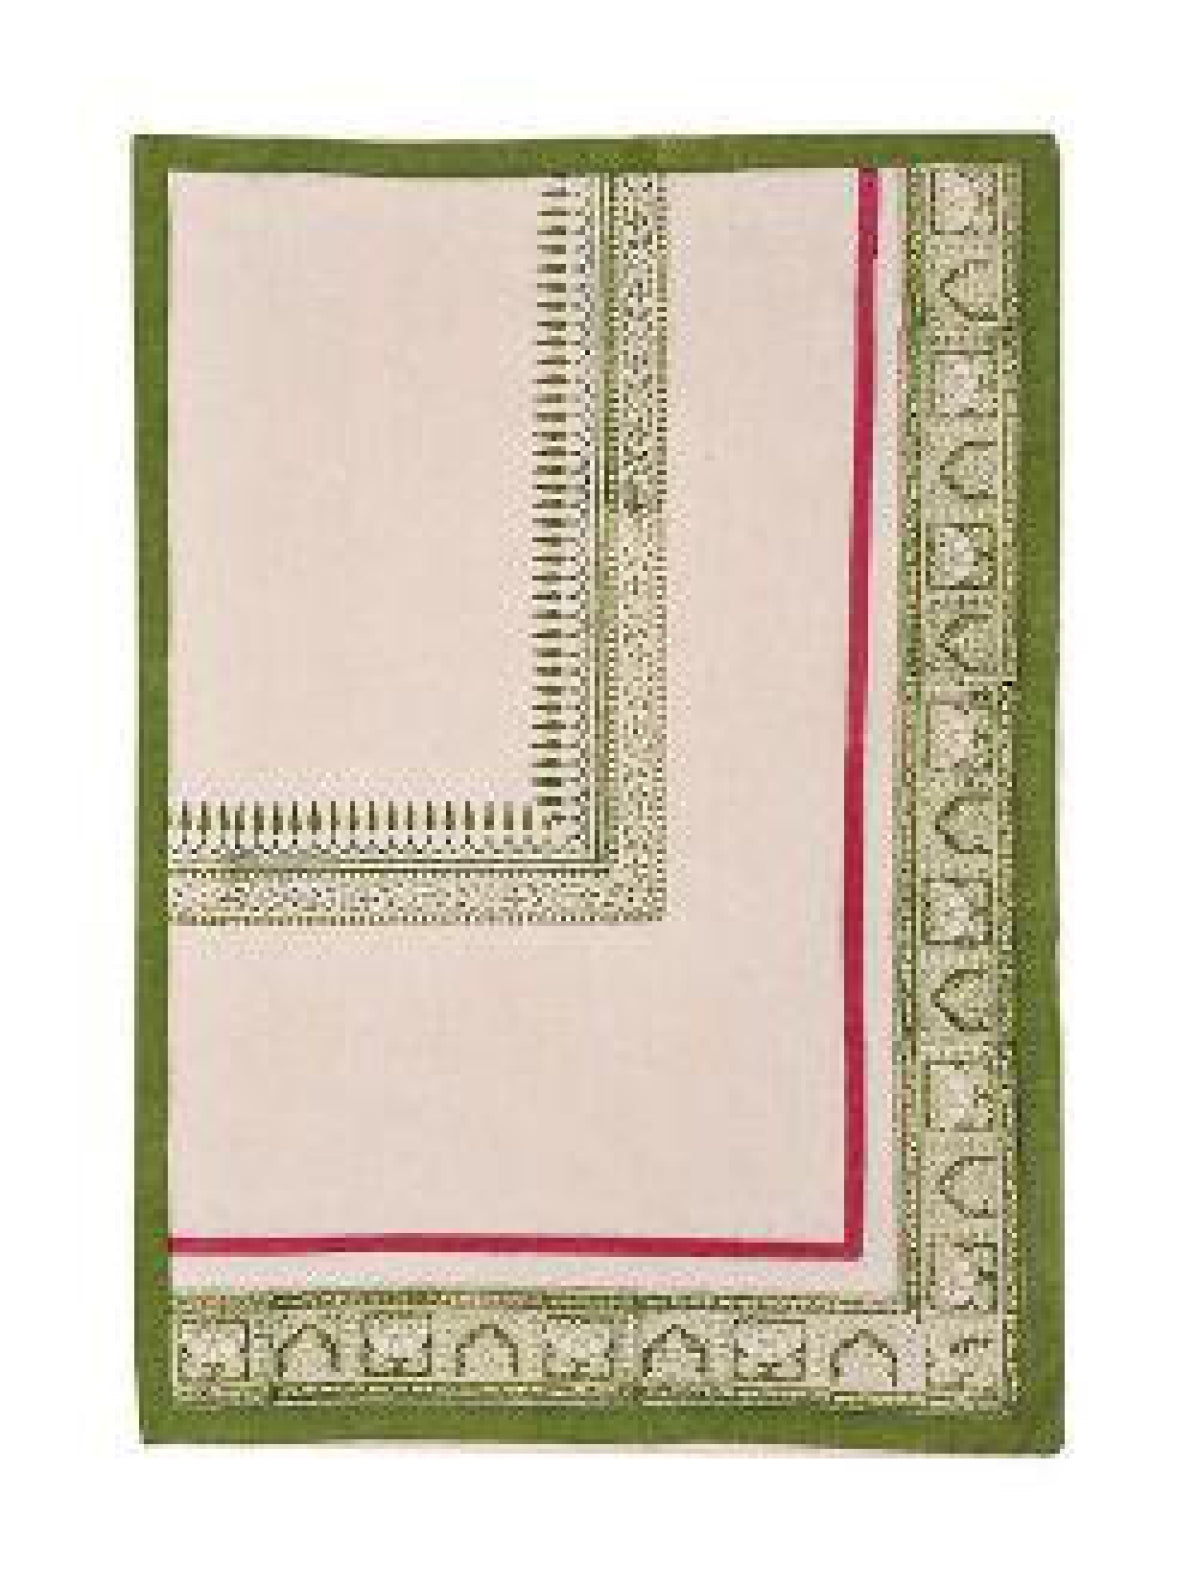 Green Stripe Table Mats with Napkins (Set of 12)